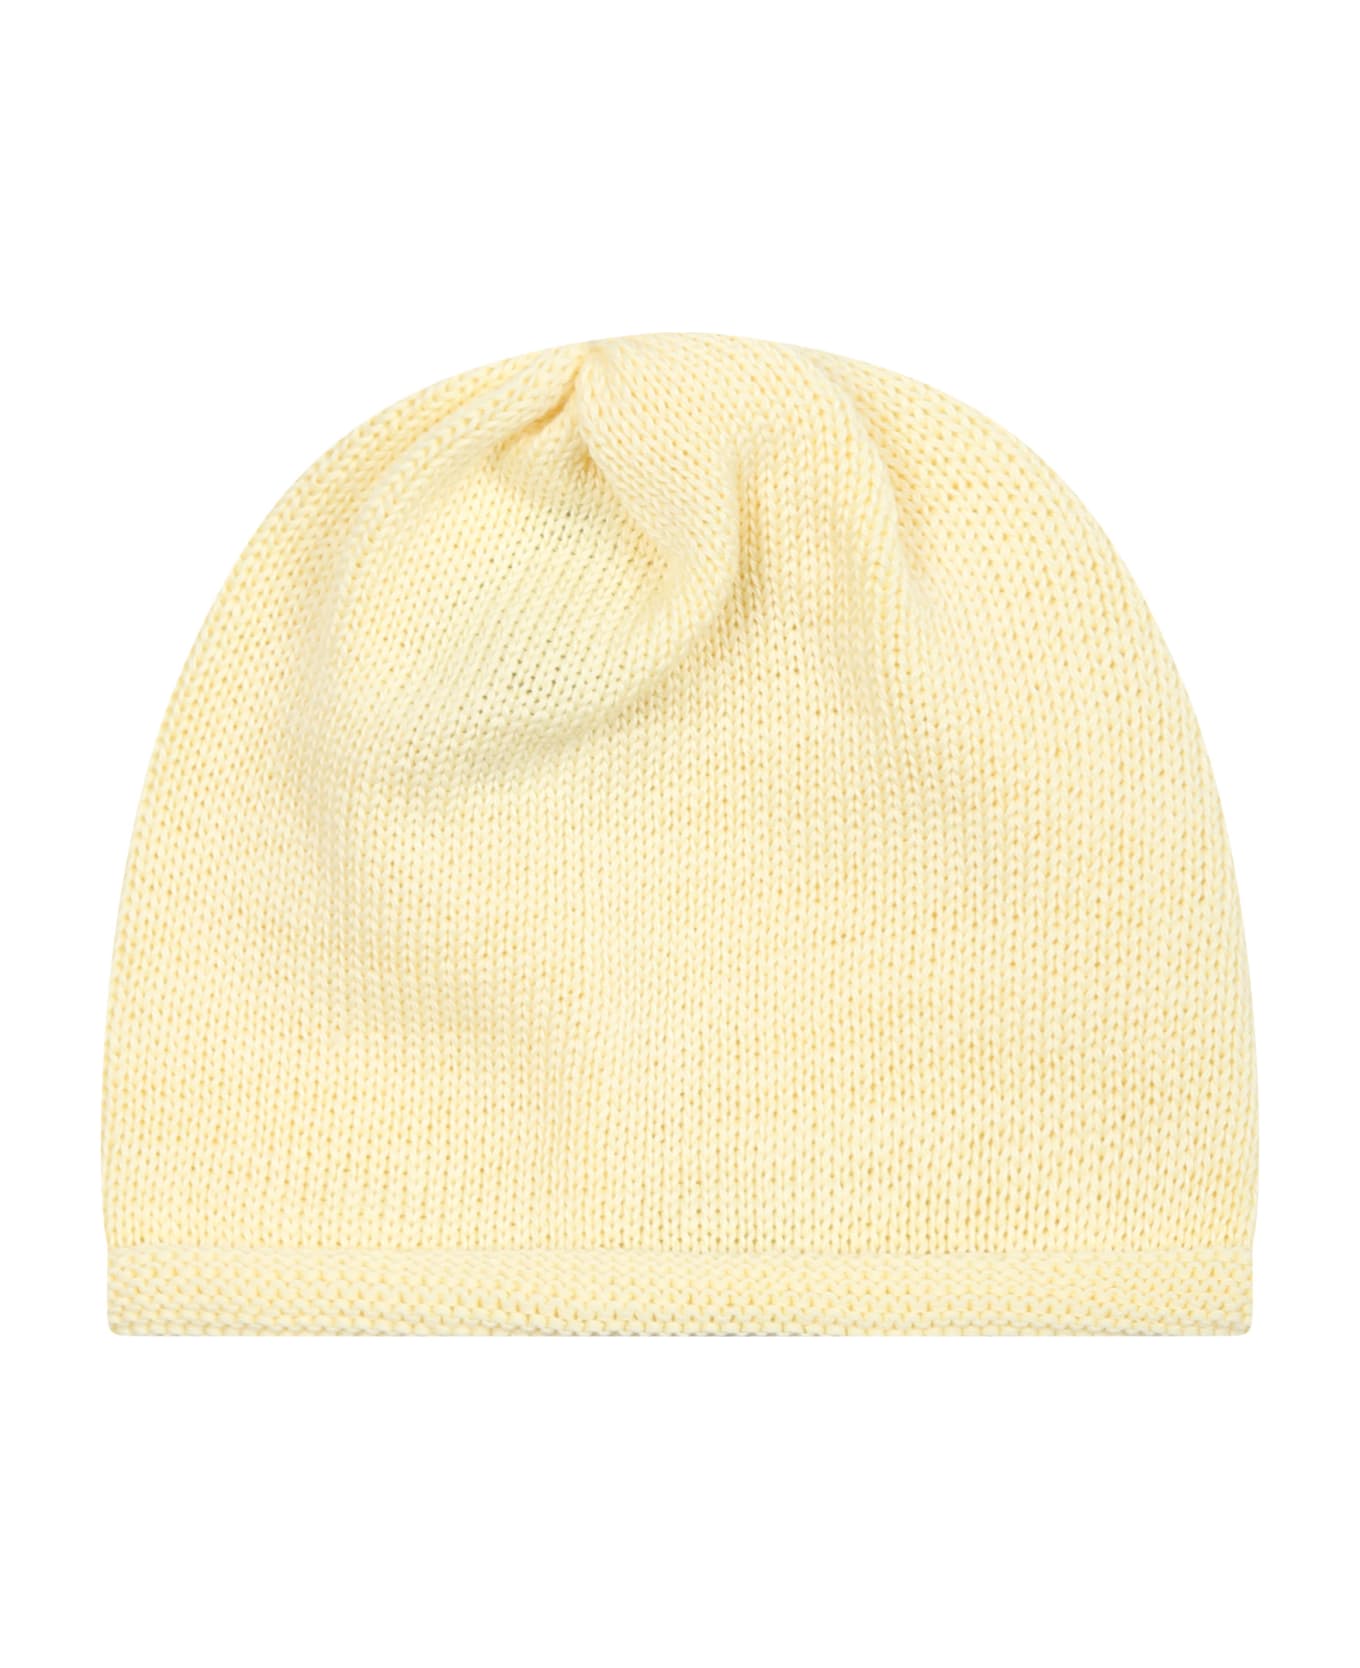 Little Bear Yellow Hat Hats For Baby Kids - Yellow